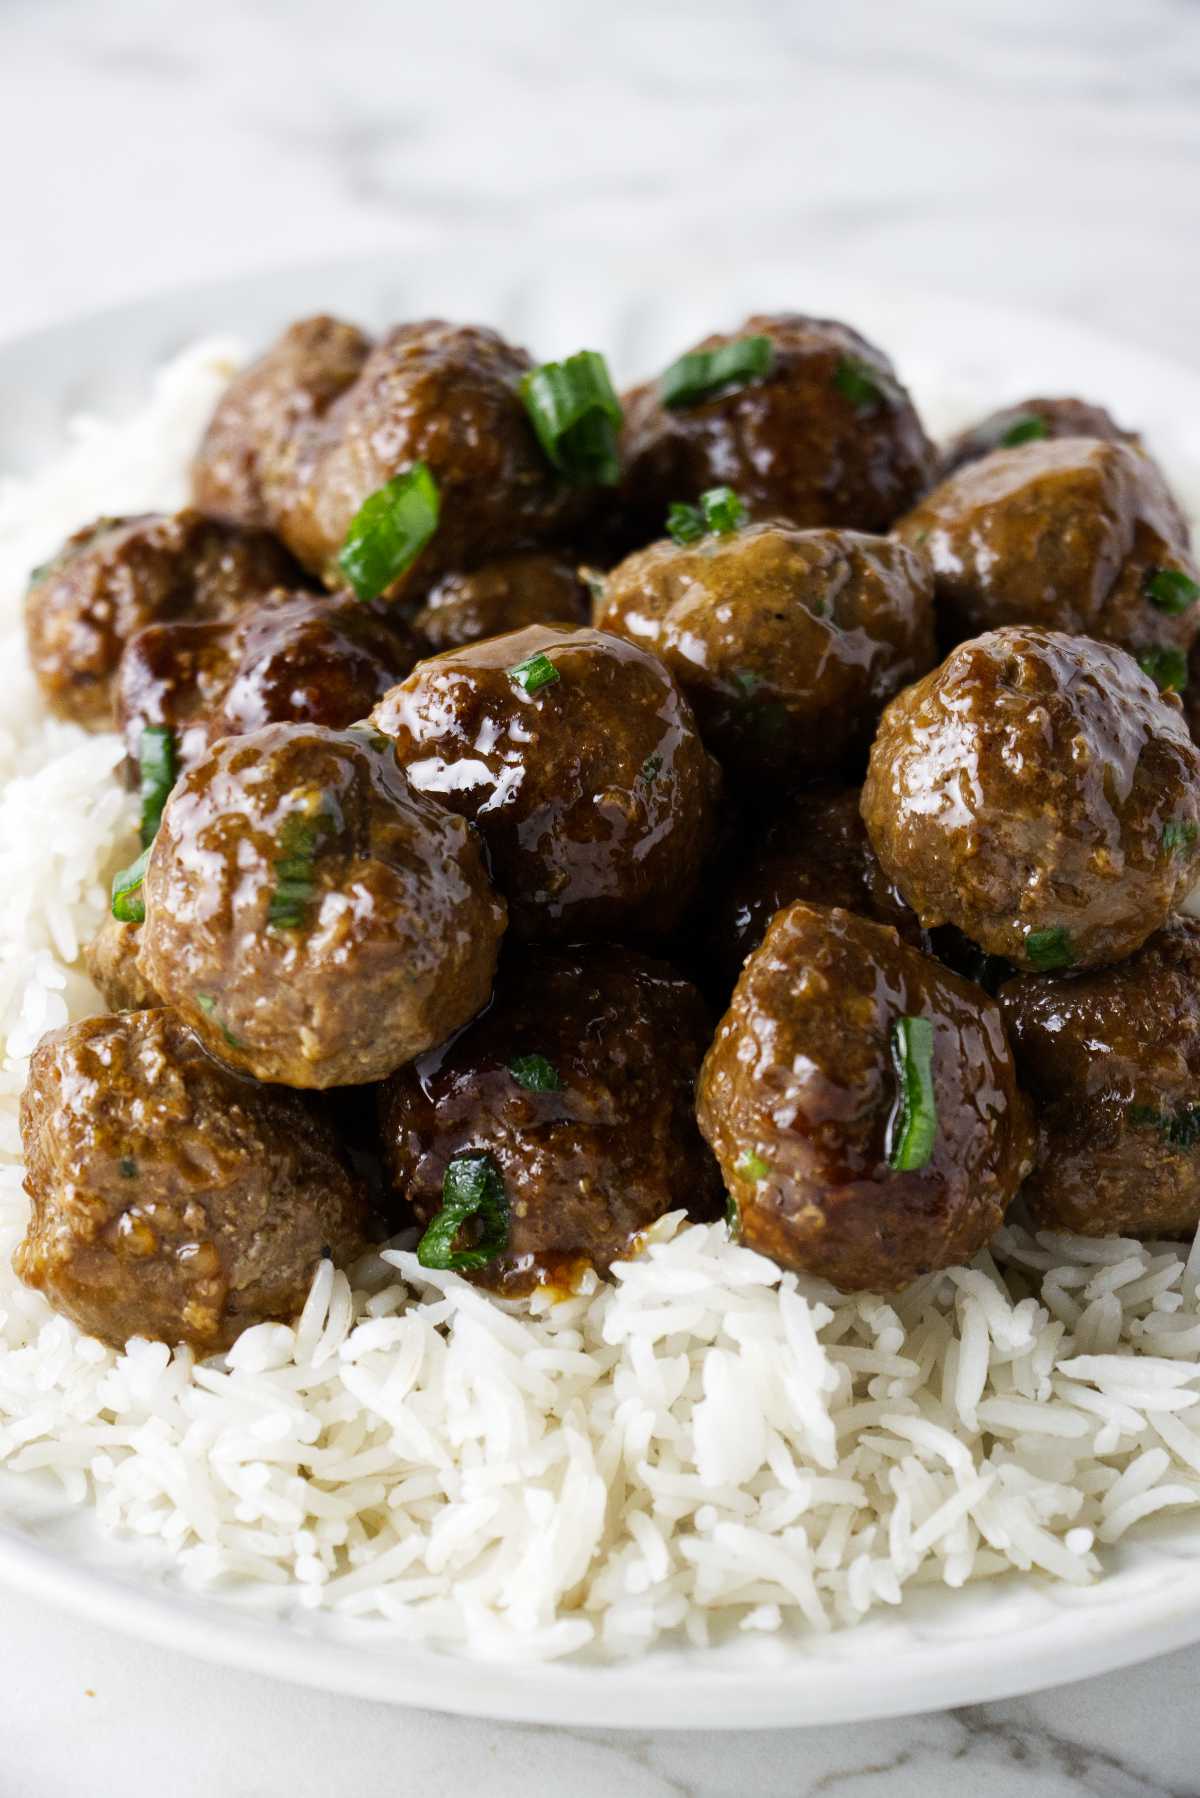 Meatballs on a bed of white rice.